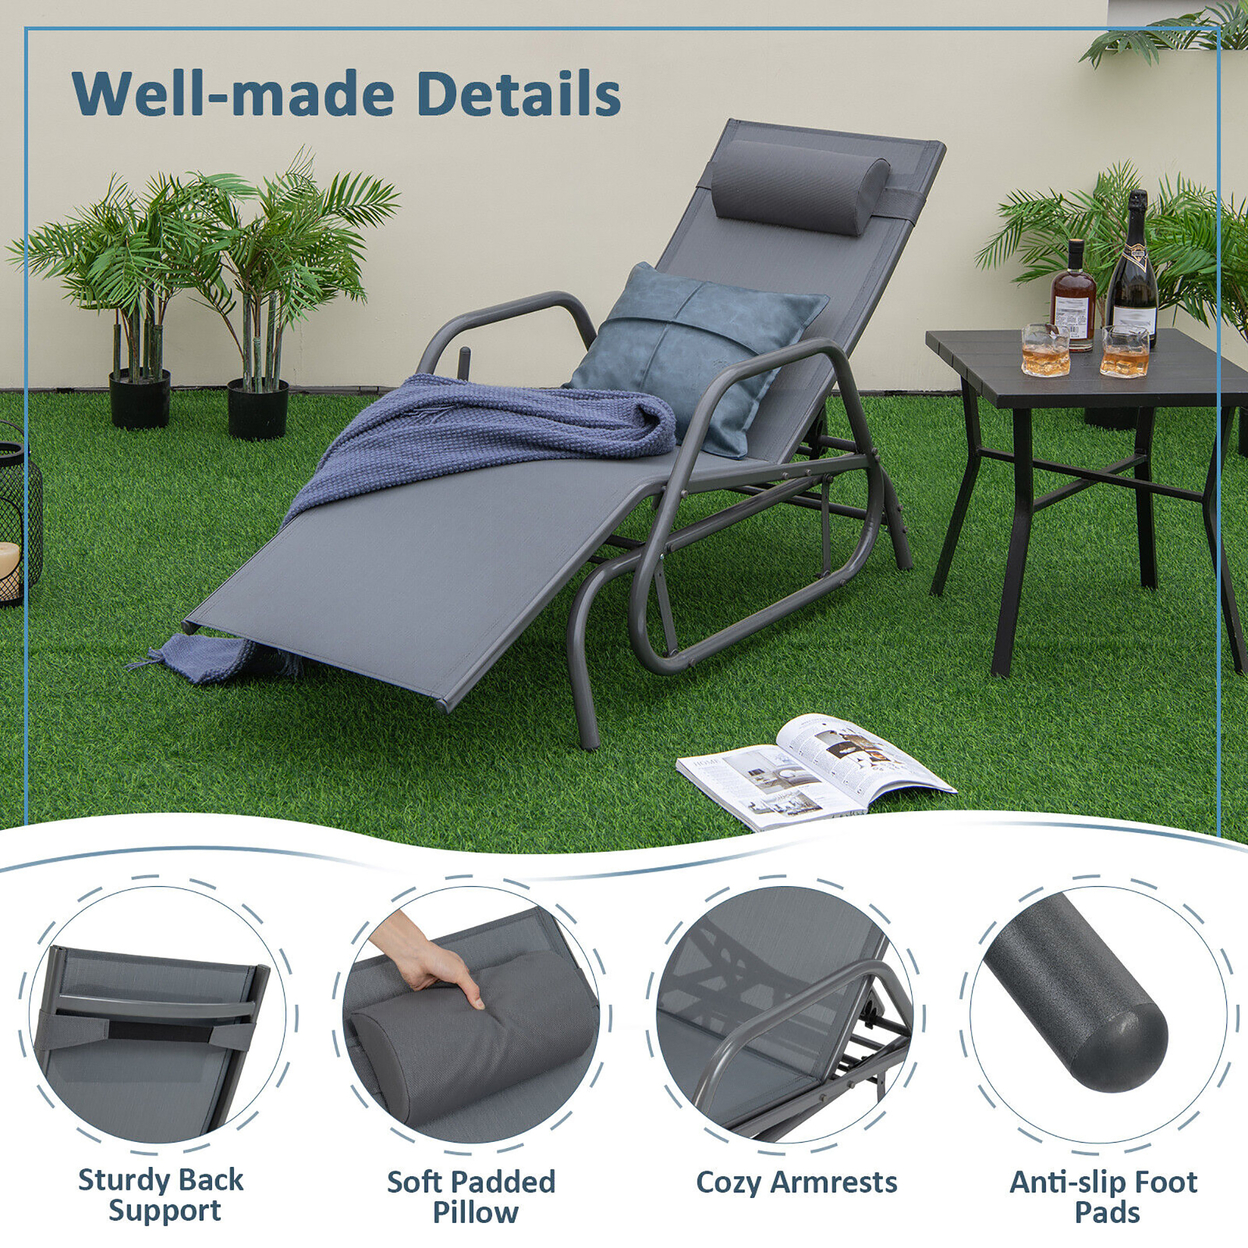 Patio Chaise Lounge Glider Recliner Chair Adjustable Sturdy Metal Frame Outdoor - Grey